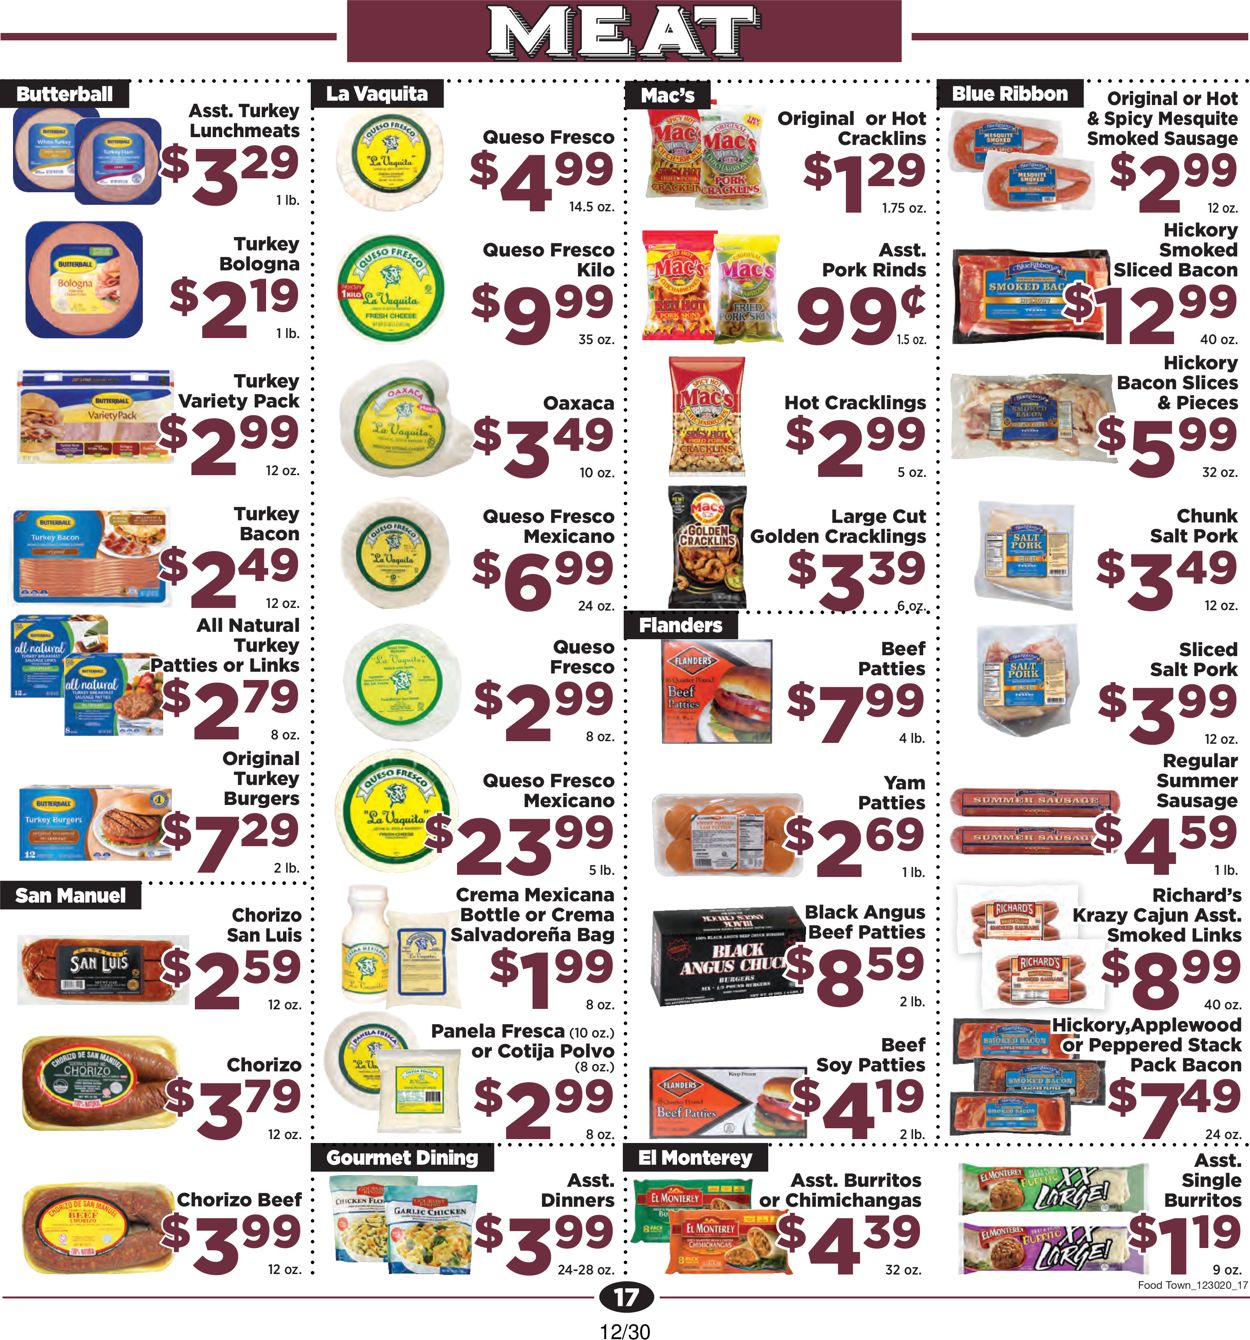 Food Town Specials & Grocery Ad Weekly Ad Circular - valid 12/30-01/05/2021 (Page 17)